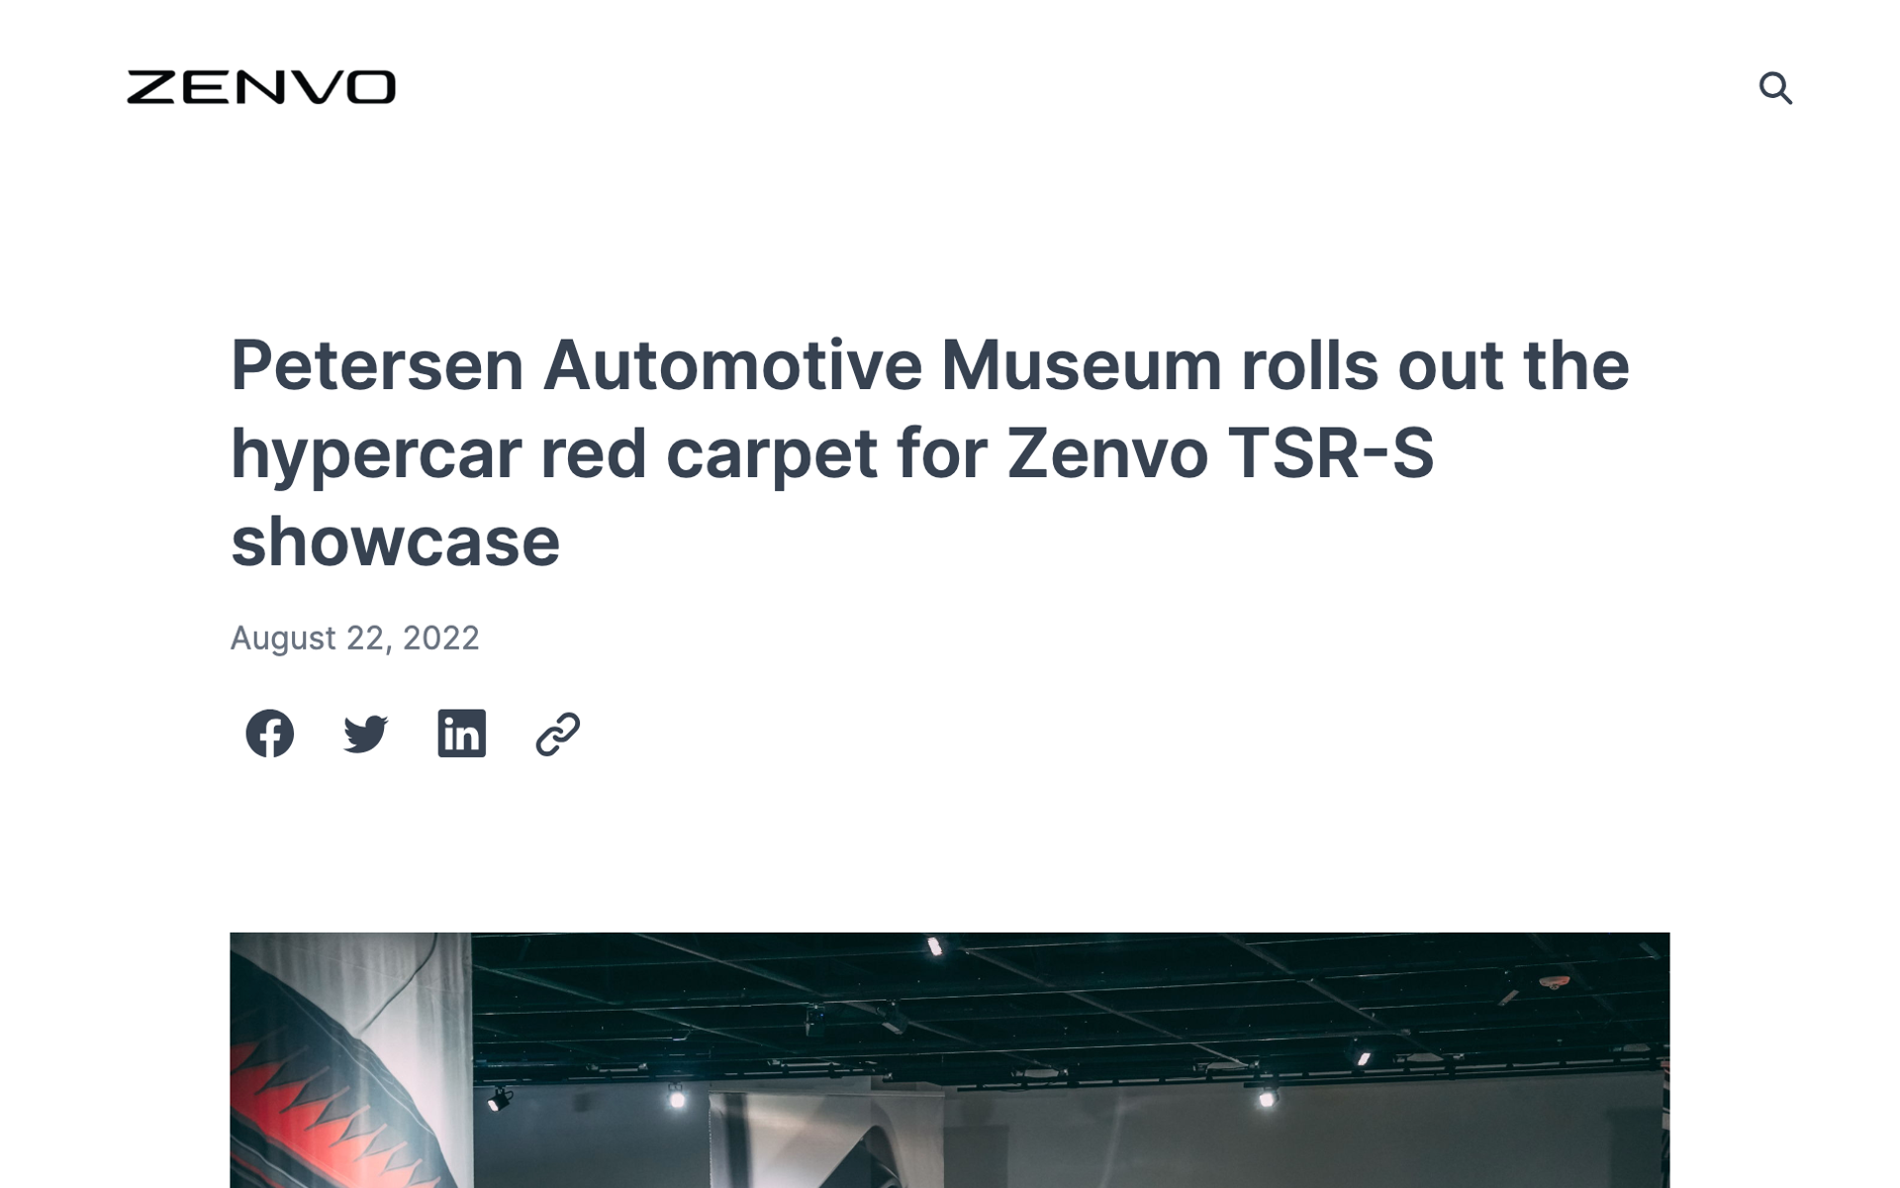 Petersen Automotive Museum rolls out the hypercar red carpet for Zenvo TSR-S showcase